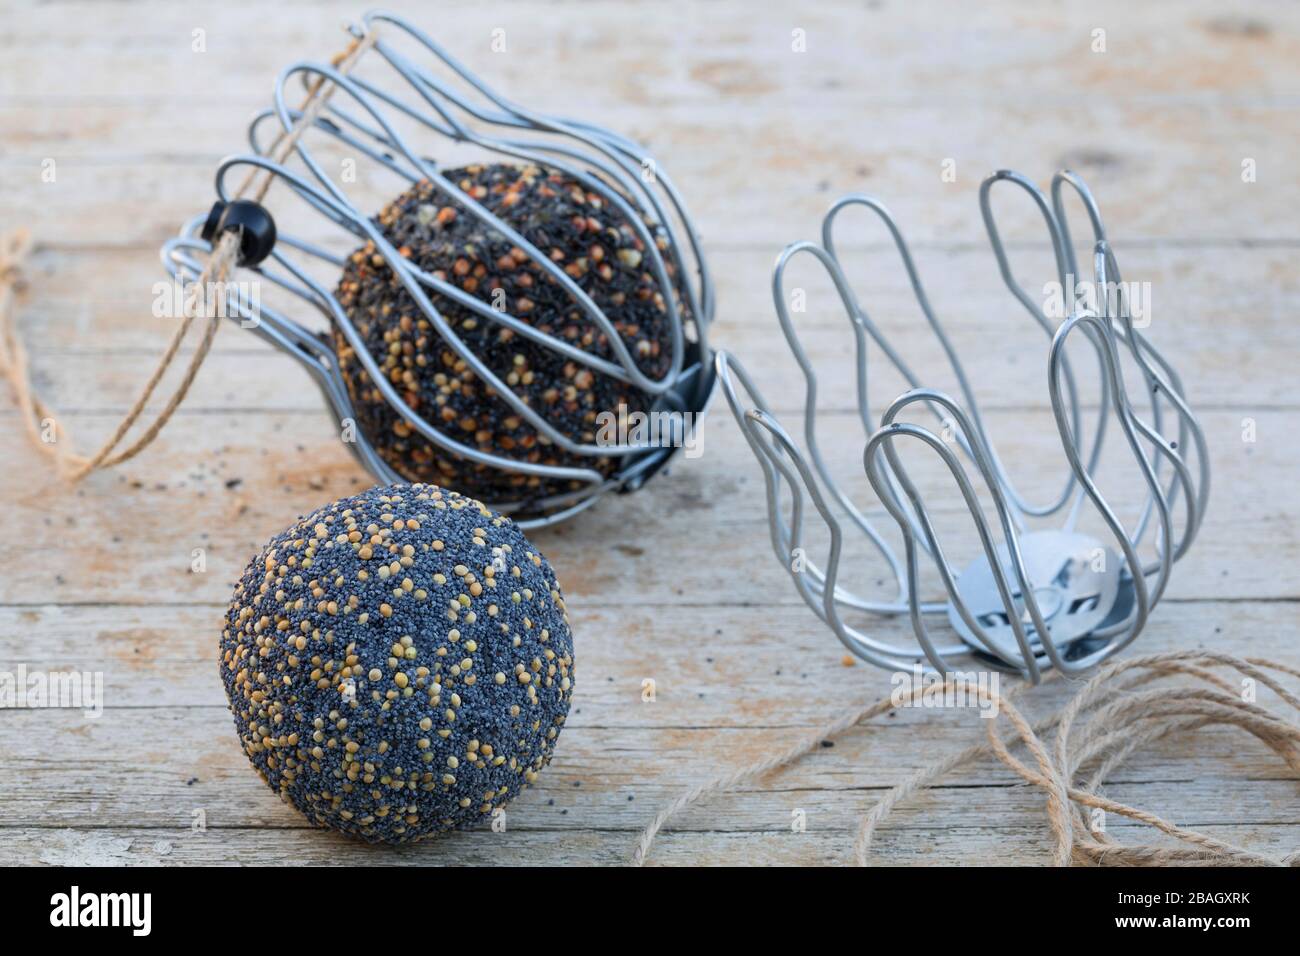 self-made bird fat balls in downpipe strainers, Germany Stock Photo